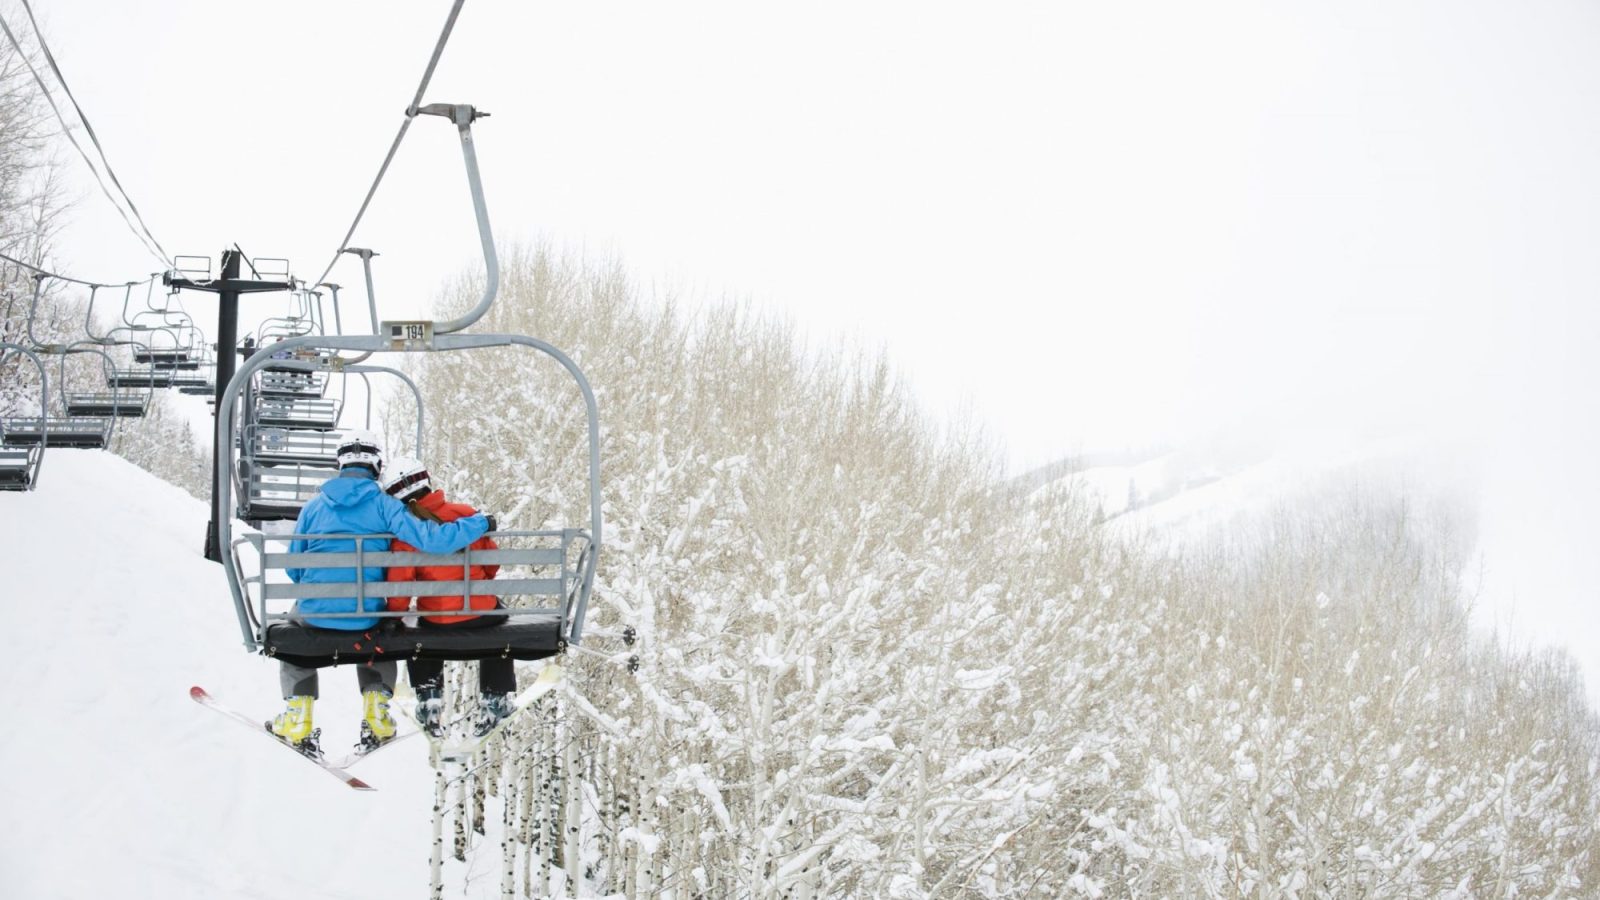 This Ski Lift Malfunction Video Will Keep You Away From the Slopes